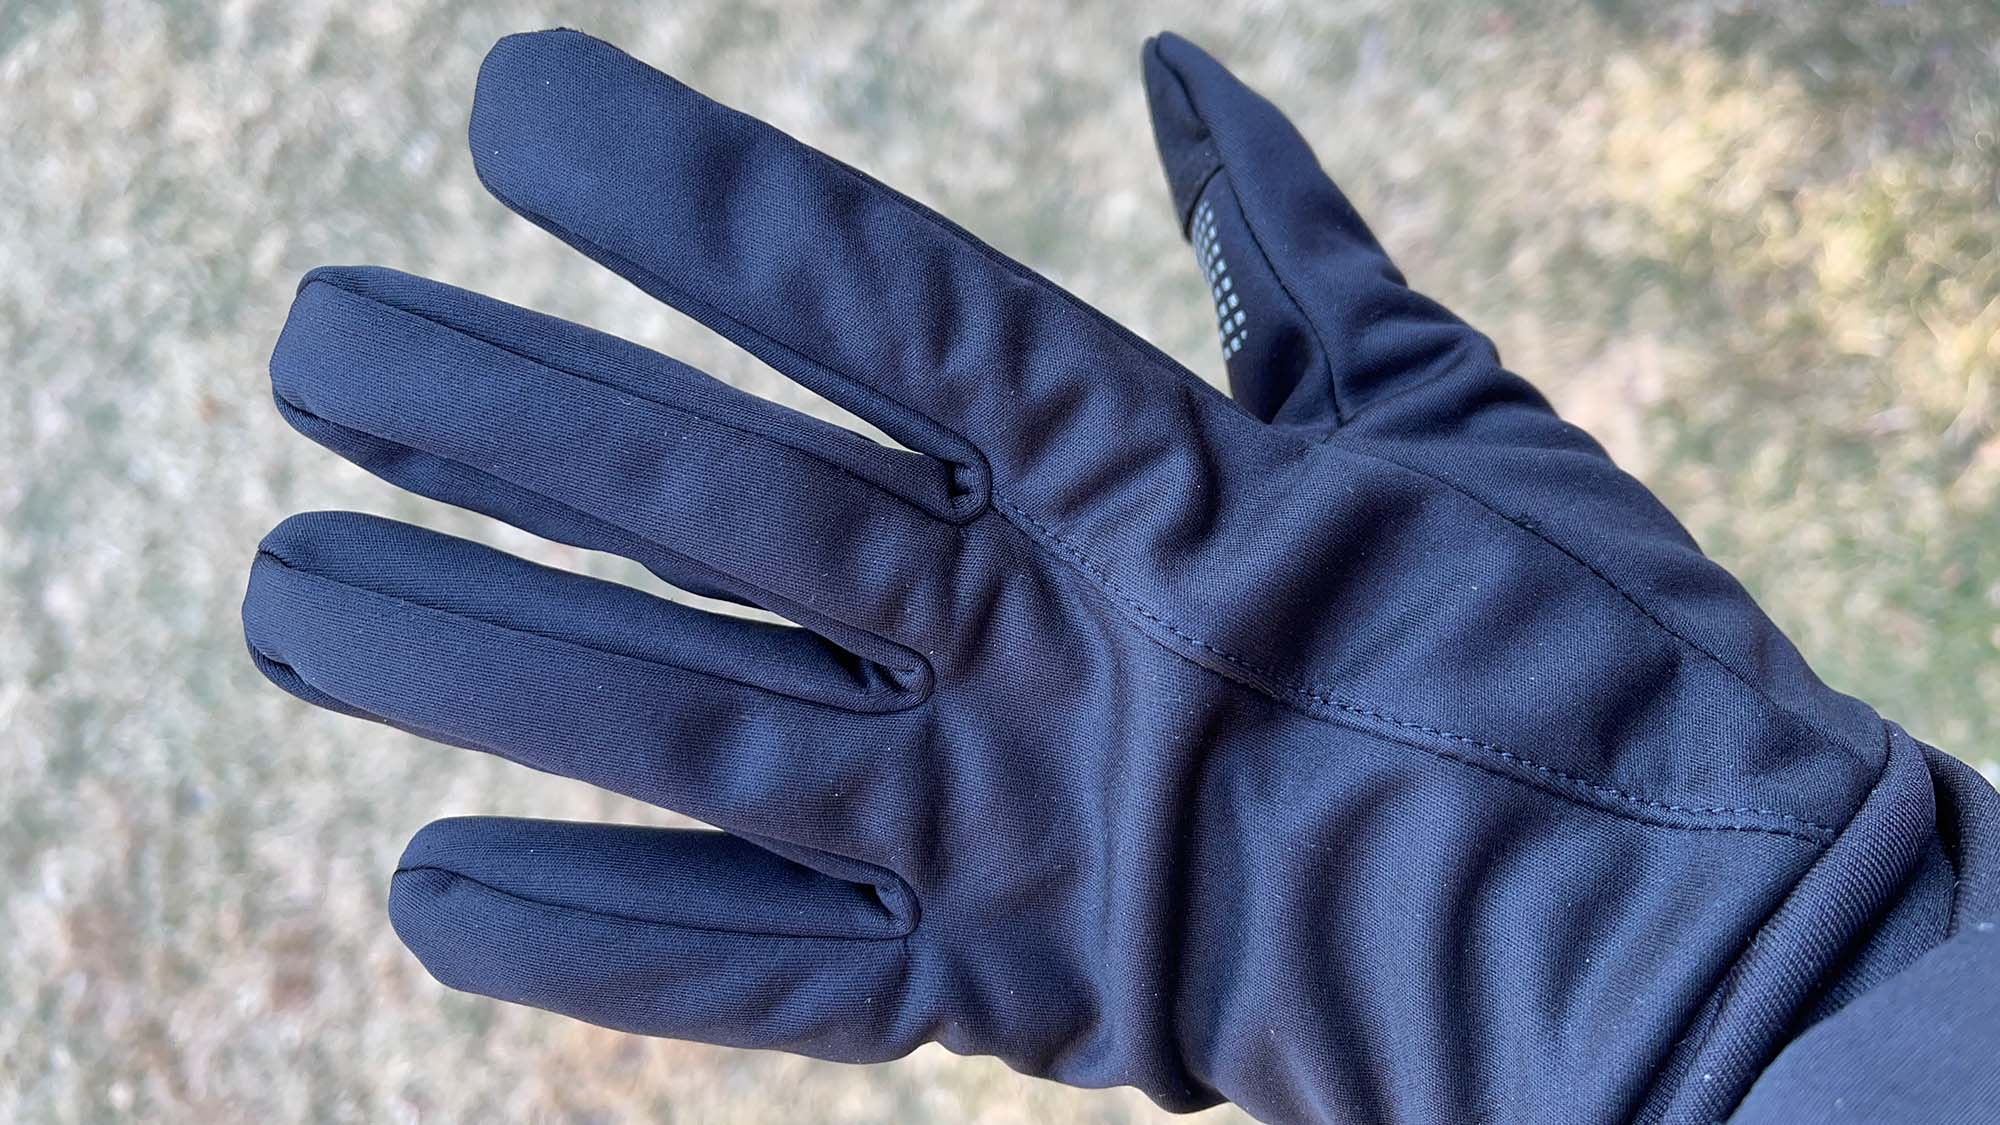 Work Gloves for Men and Women,Touchscreen Working Gloves with Grip